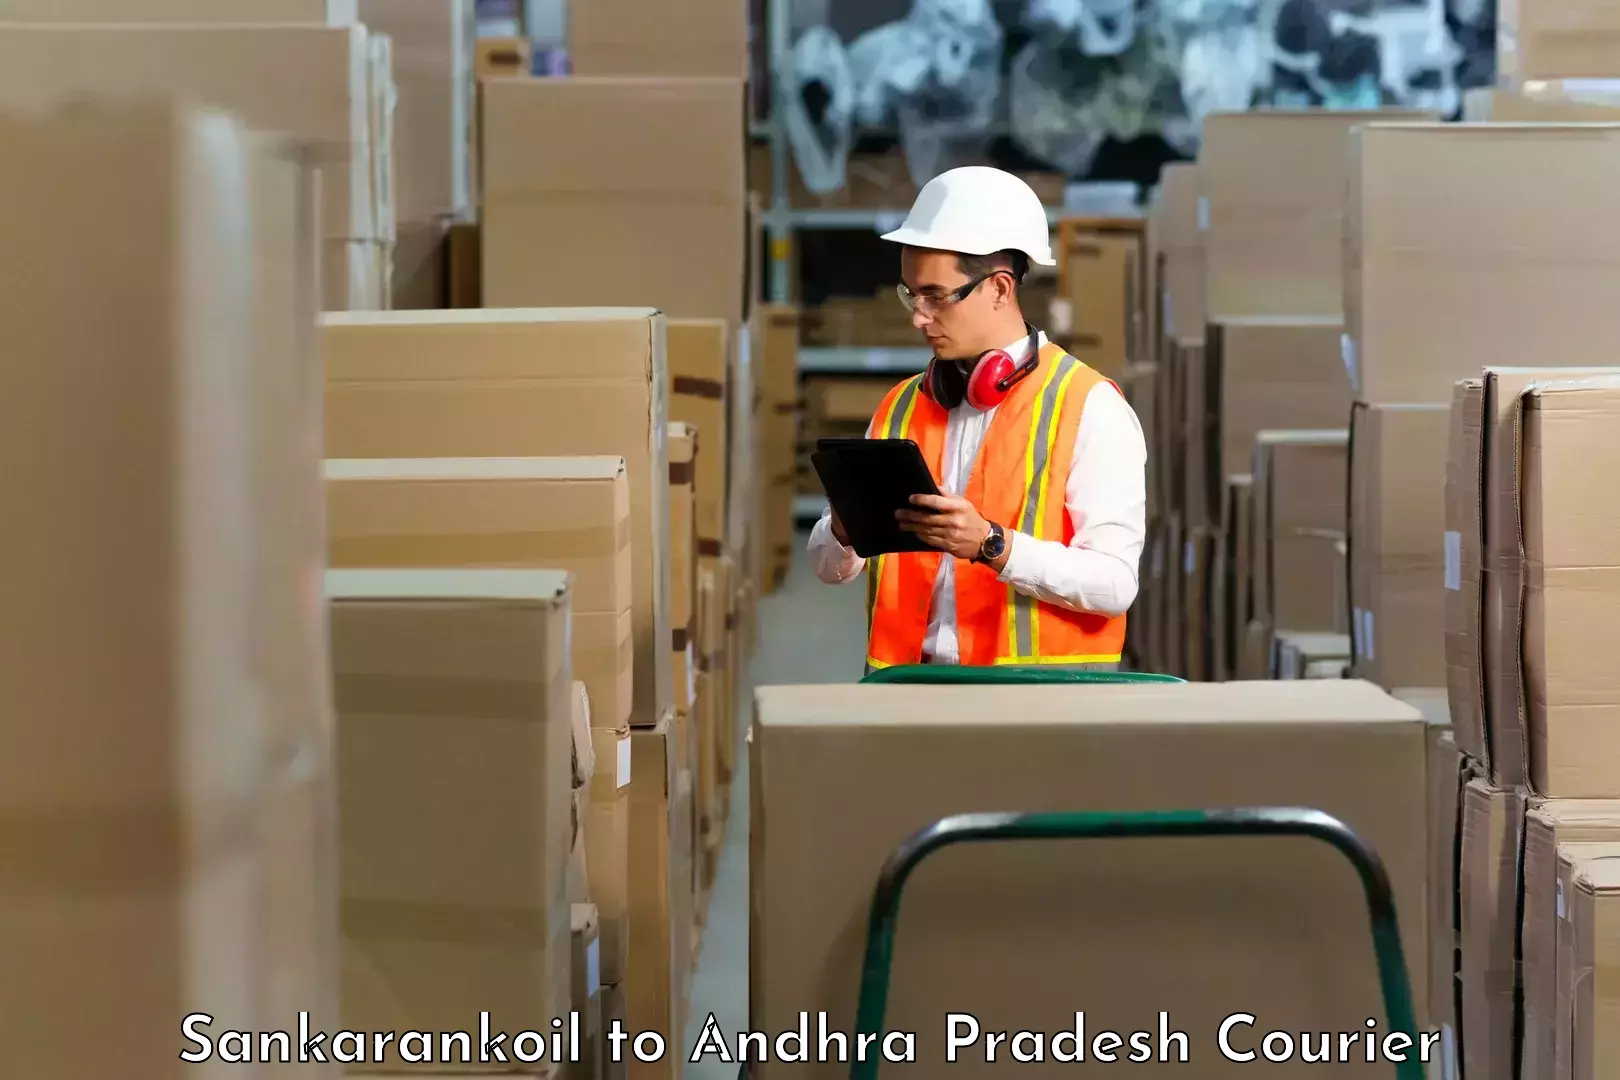 Easy access courier services Sankarankoil to Andhra Pradesh